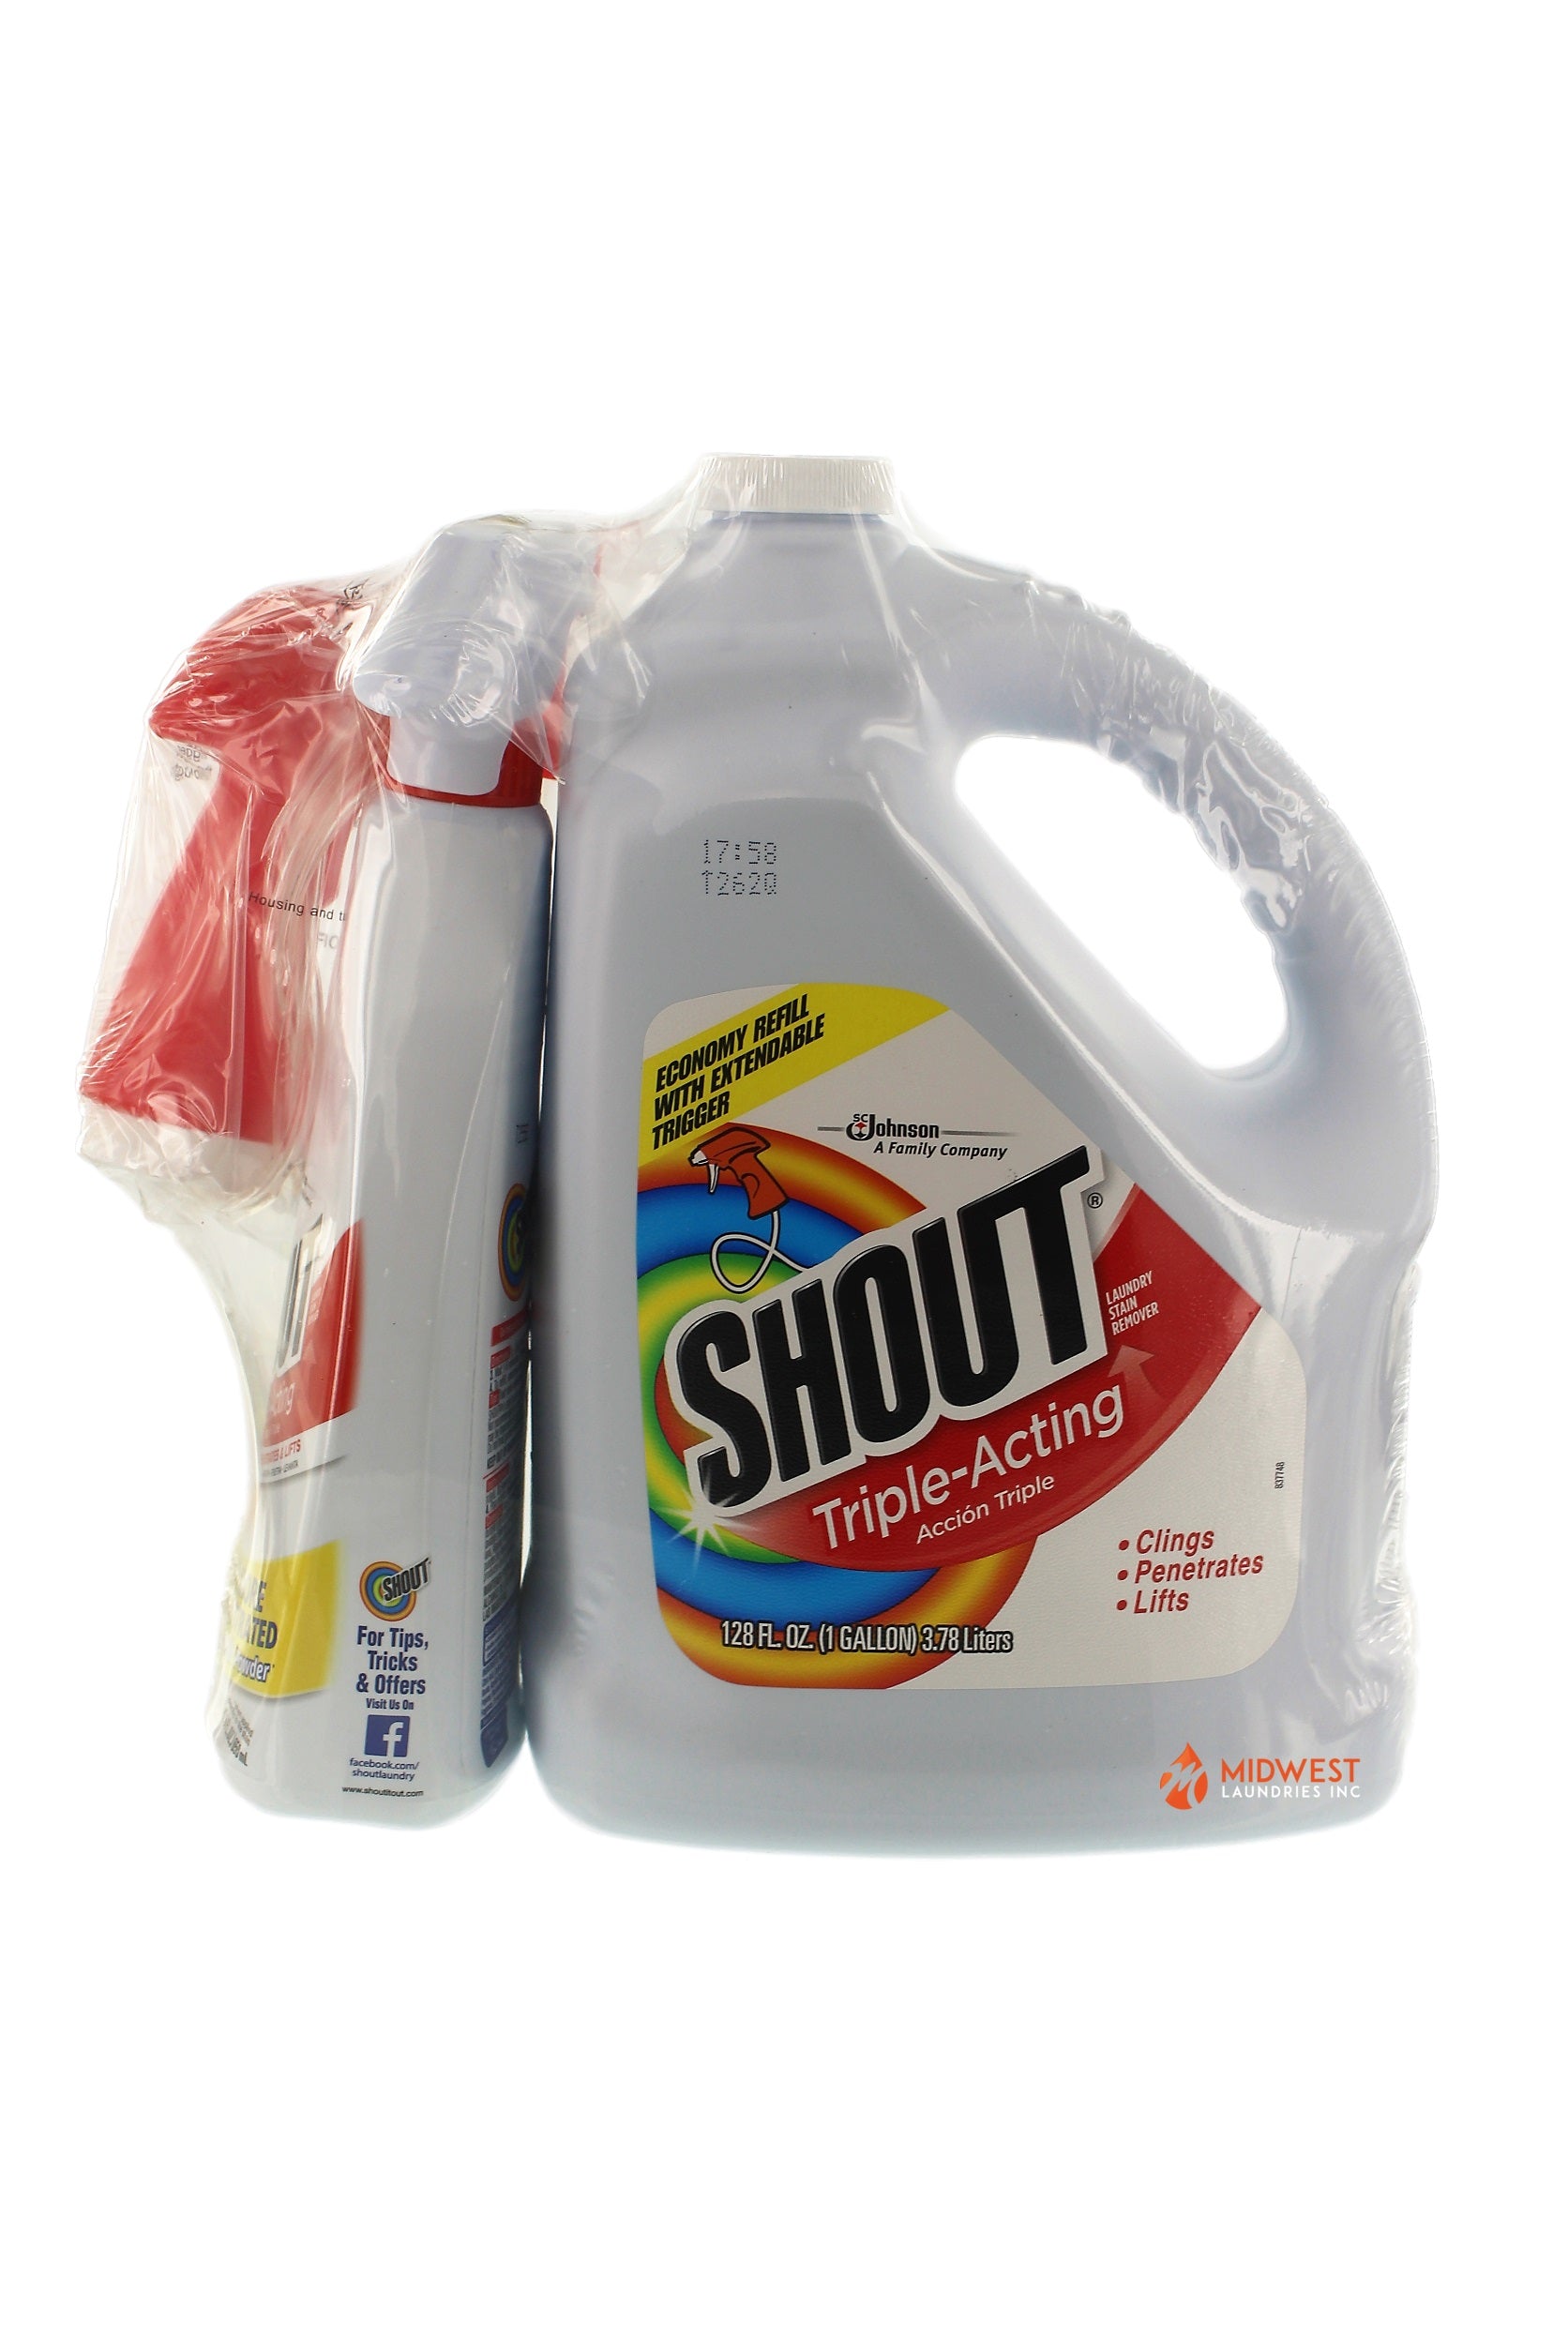 shout it out stain remover